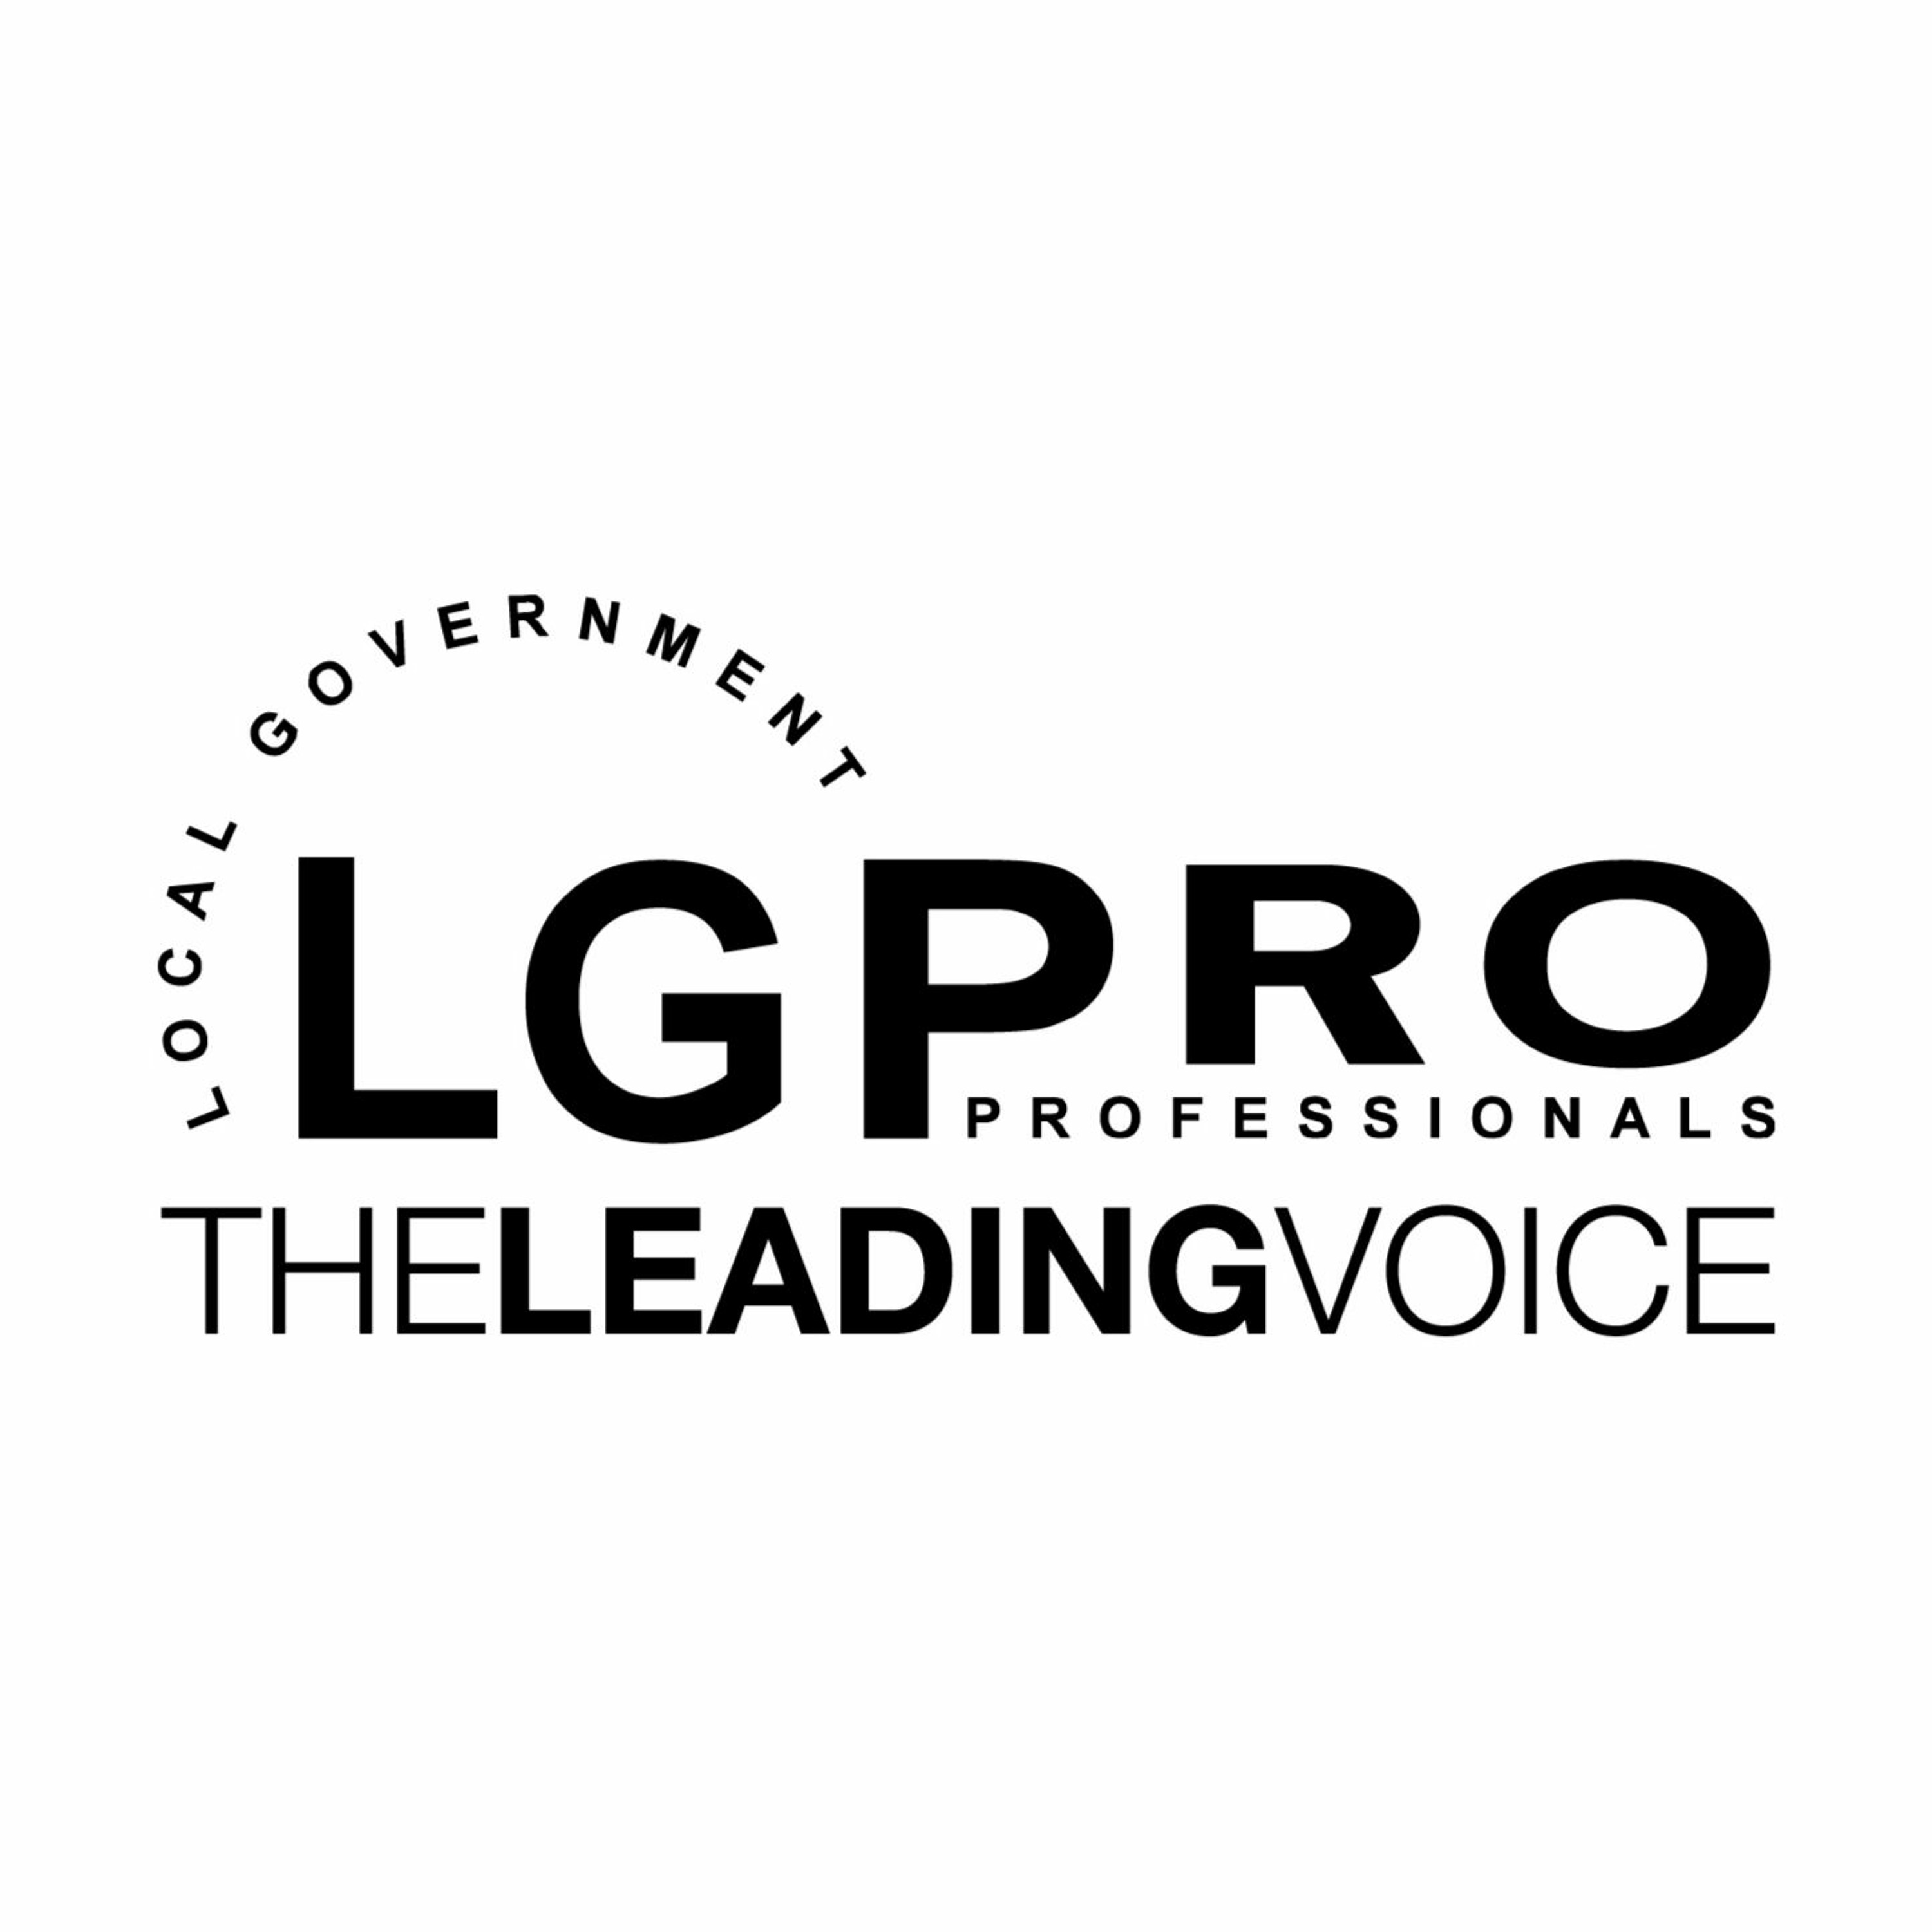 LGProcast - Episode 8 - Next Steps in the Culture Review